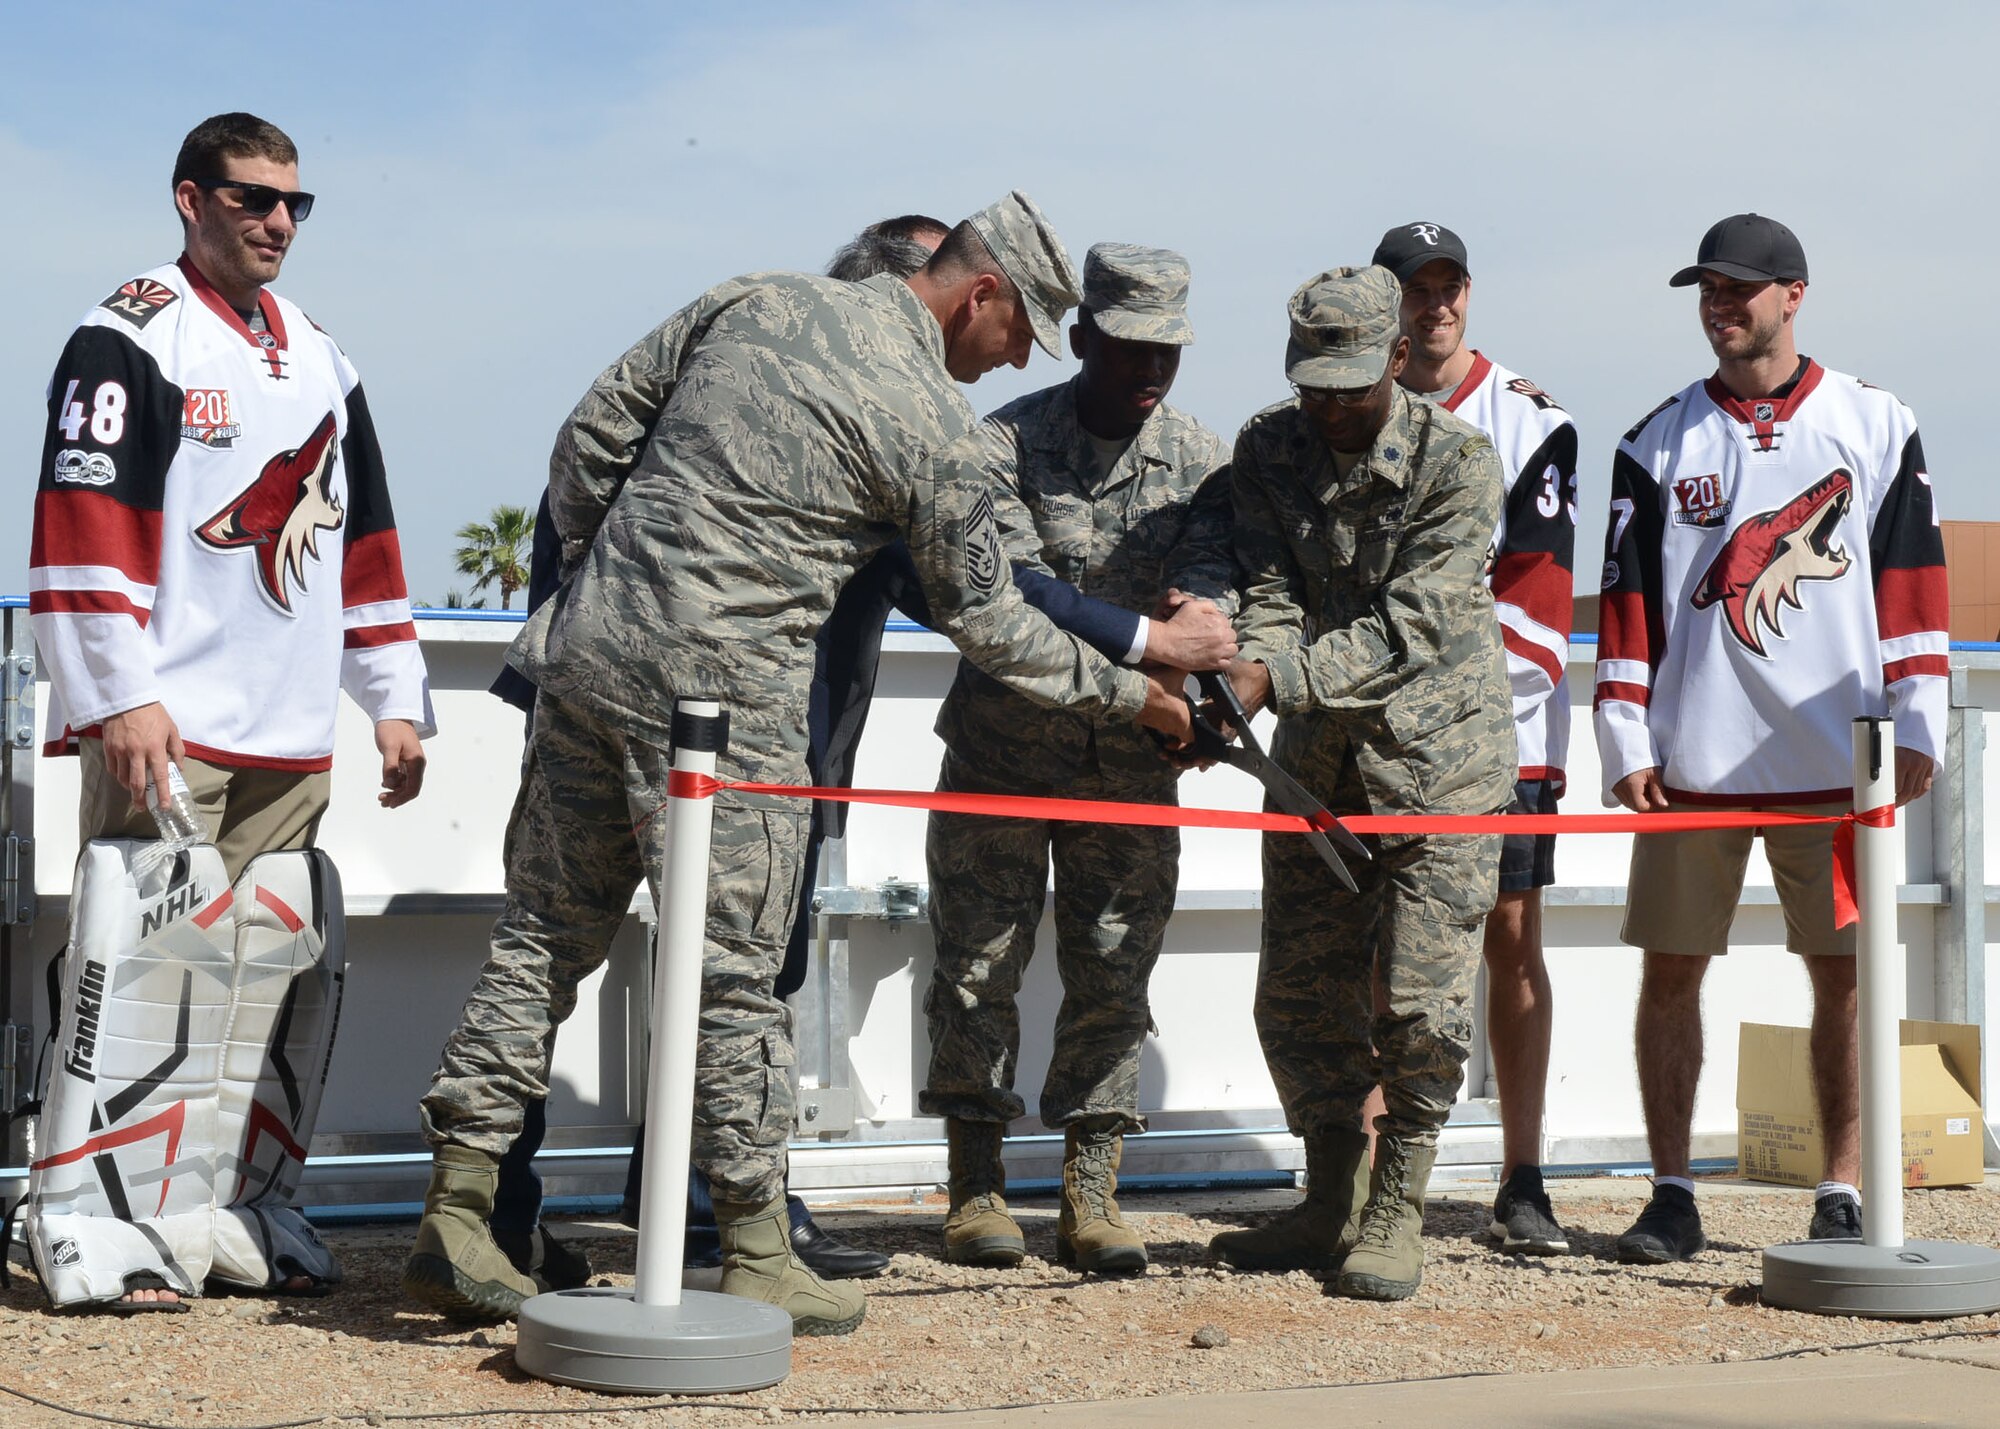 Lt. Col. Kevin Marzette, 56th Mission Support Group deputy commander, and Chief Master Sgt. Randall Kwiatkowski, 56th Fighter Wing command chief, cut the ribbon signifying the opening of the deck hockey rink April 13, 2017, at Luke Air Force Base, Ariz. The Arizona Coyotes attended the ceremony and held a skills clinic for Airmen afterwards. (U.S. Air Force photo by Senior Airman James Hensley)